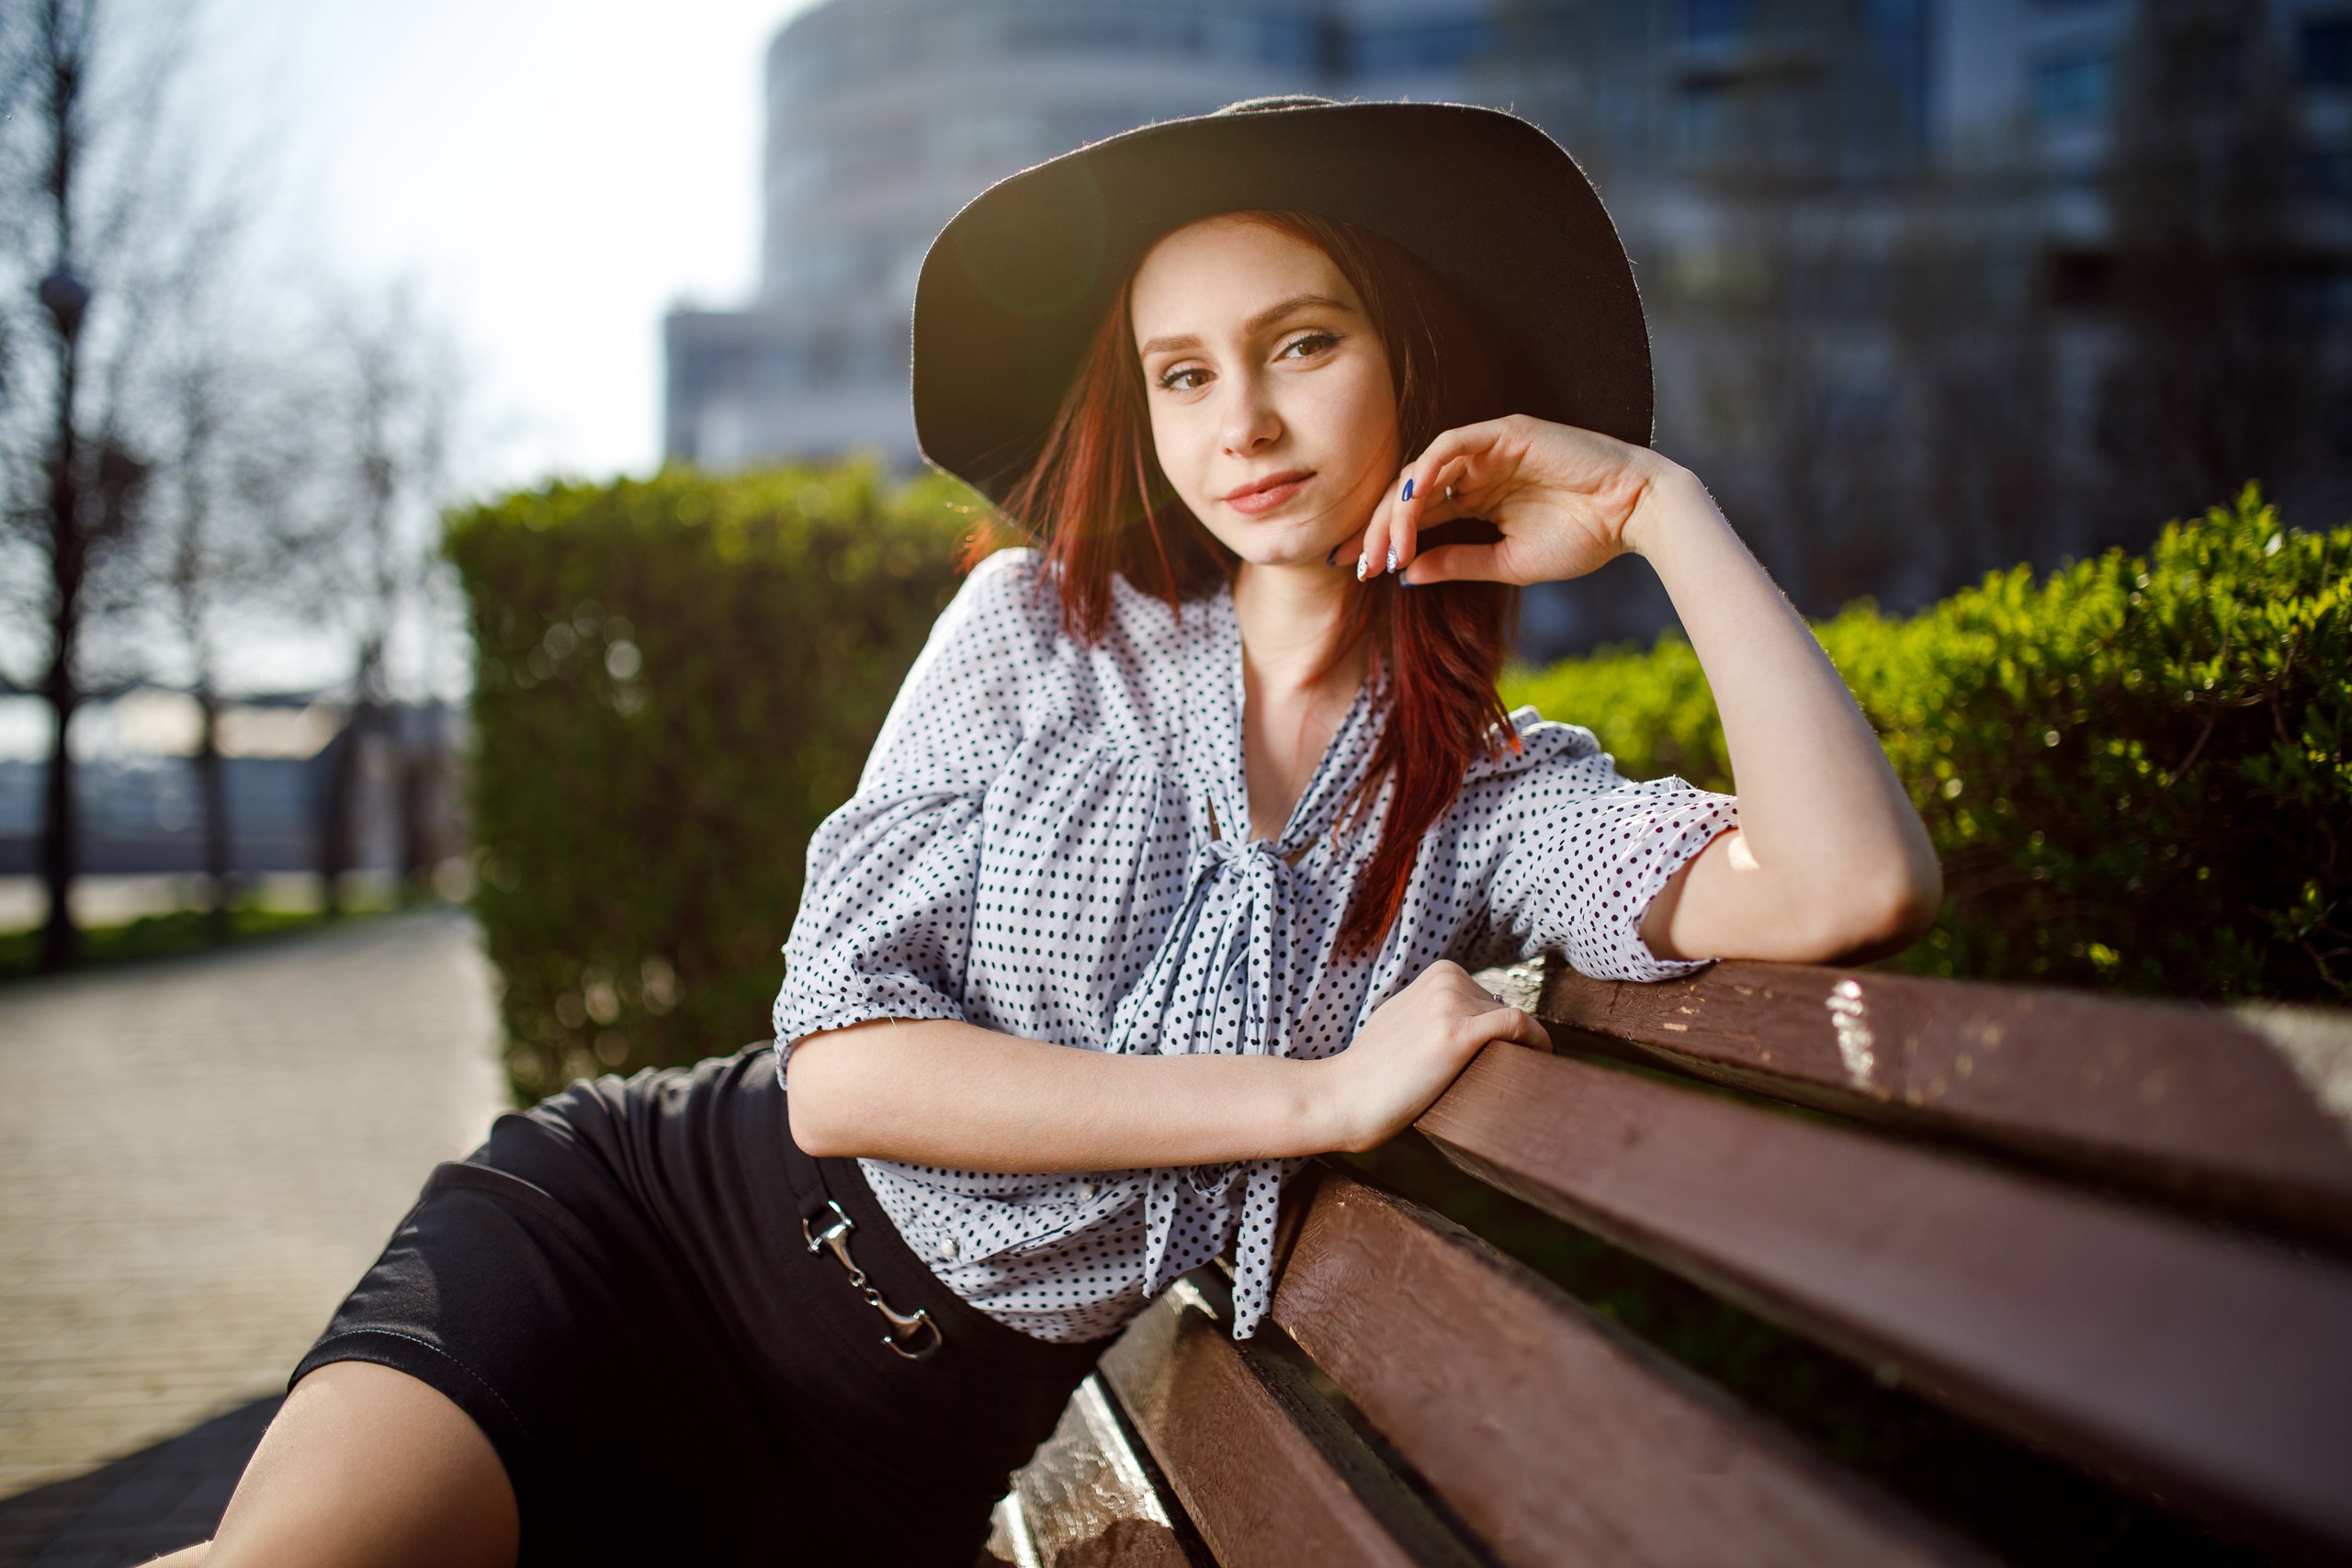 People 2560x1707 women model redhead portrait outdoors women with hats hat blouses skirt black skirts sitting bench bushes depth of field lens flare painted nails looking at viewer women outdoors